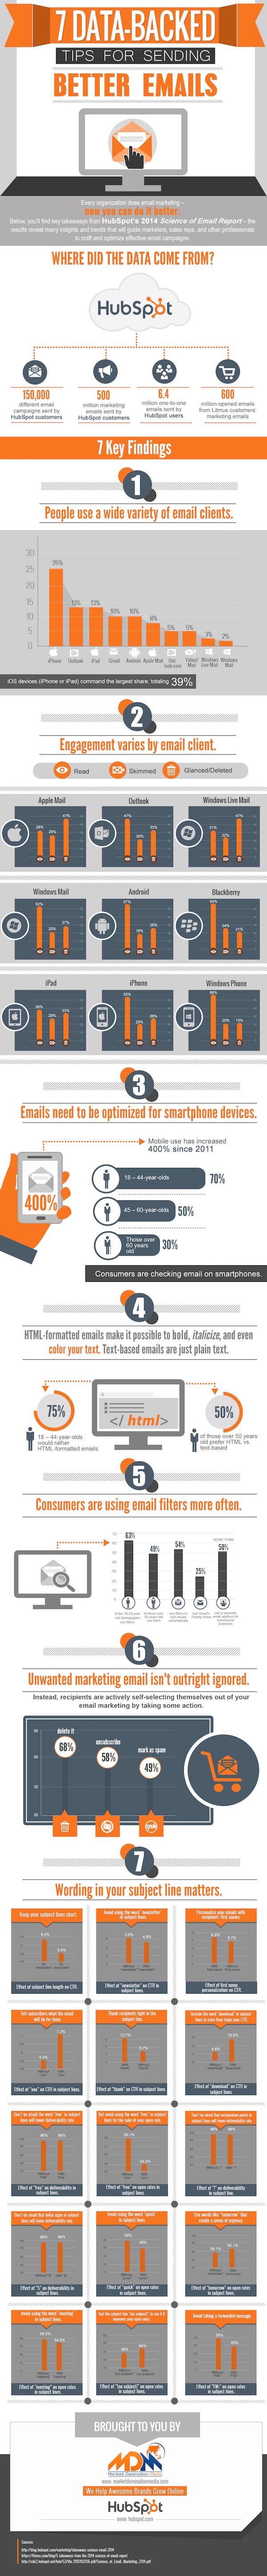 Send Better Emails Using These 7 Data-Backed Tips [Infographic]